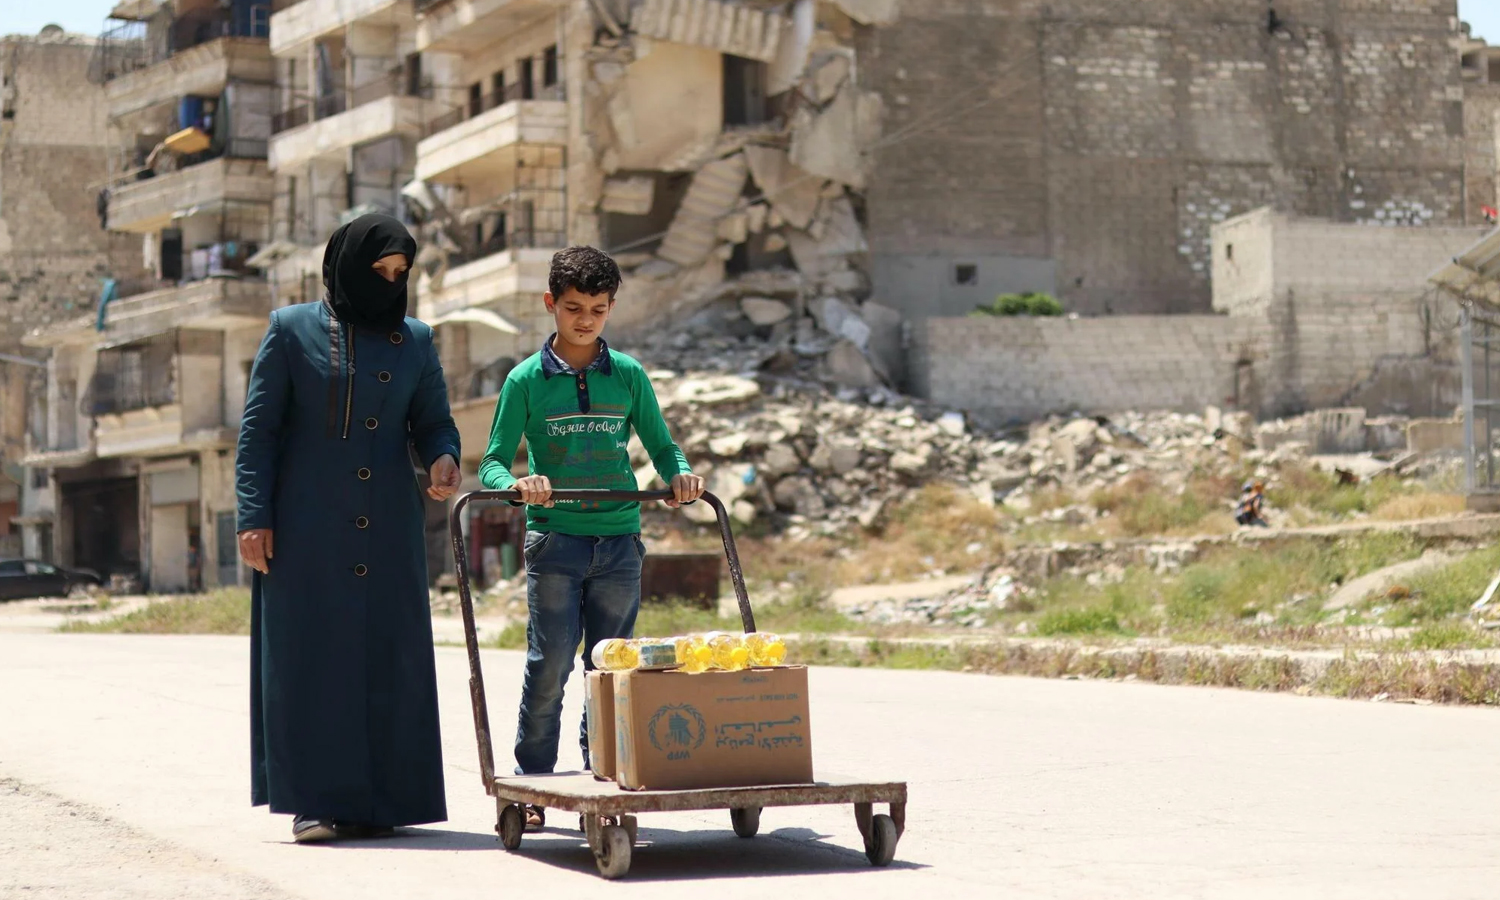 A displaced Syrian woman carrying a humanitarian aid box in Idlib city, northwest Syria - 19 February 2020 (AFP)